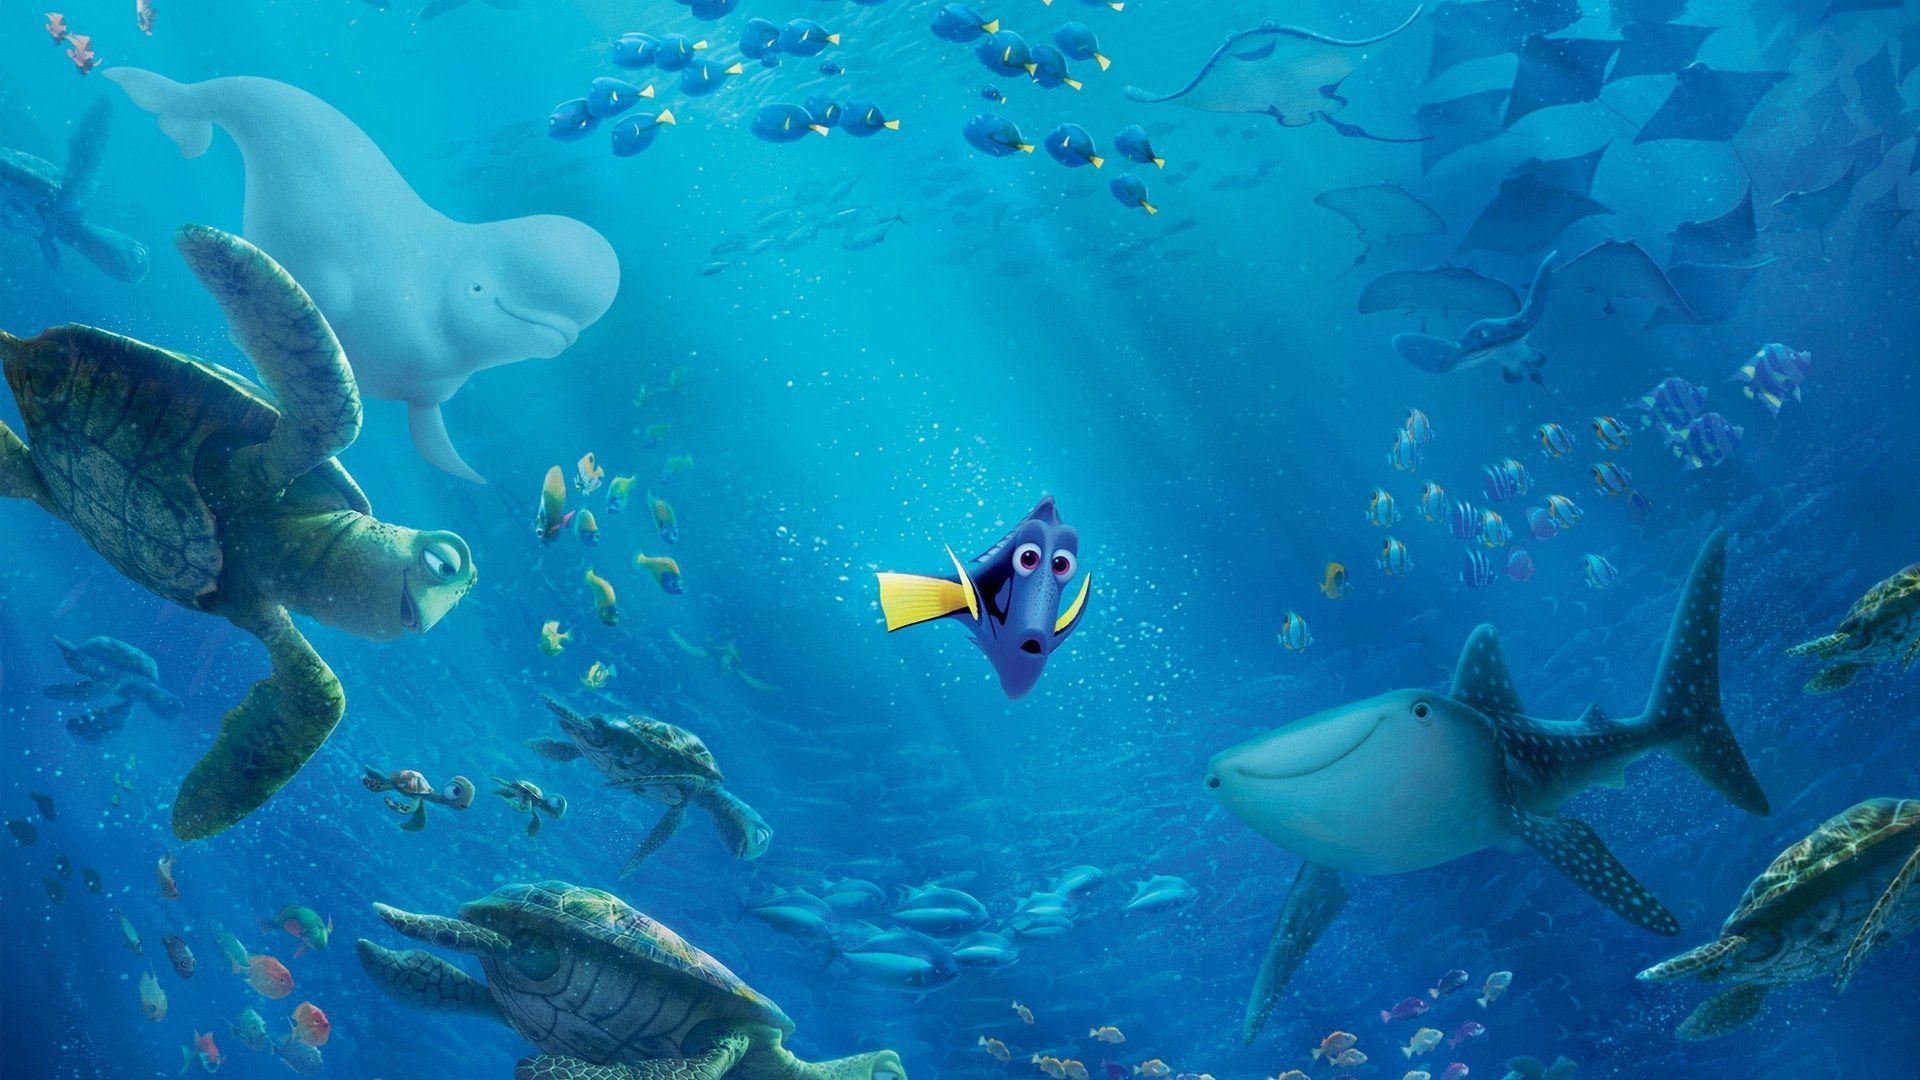 Finding Nemo Wallpapers Top Free Finding Nemo Backgrounds Wallpaperaccess 4687